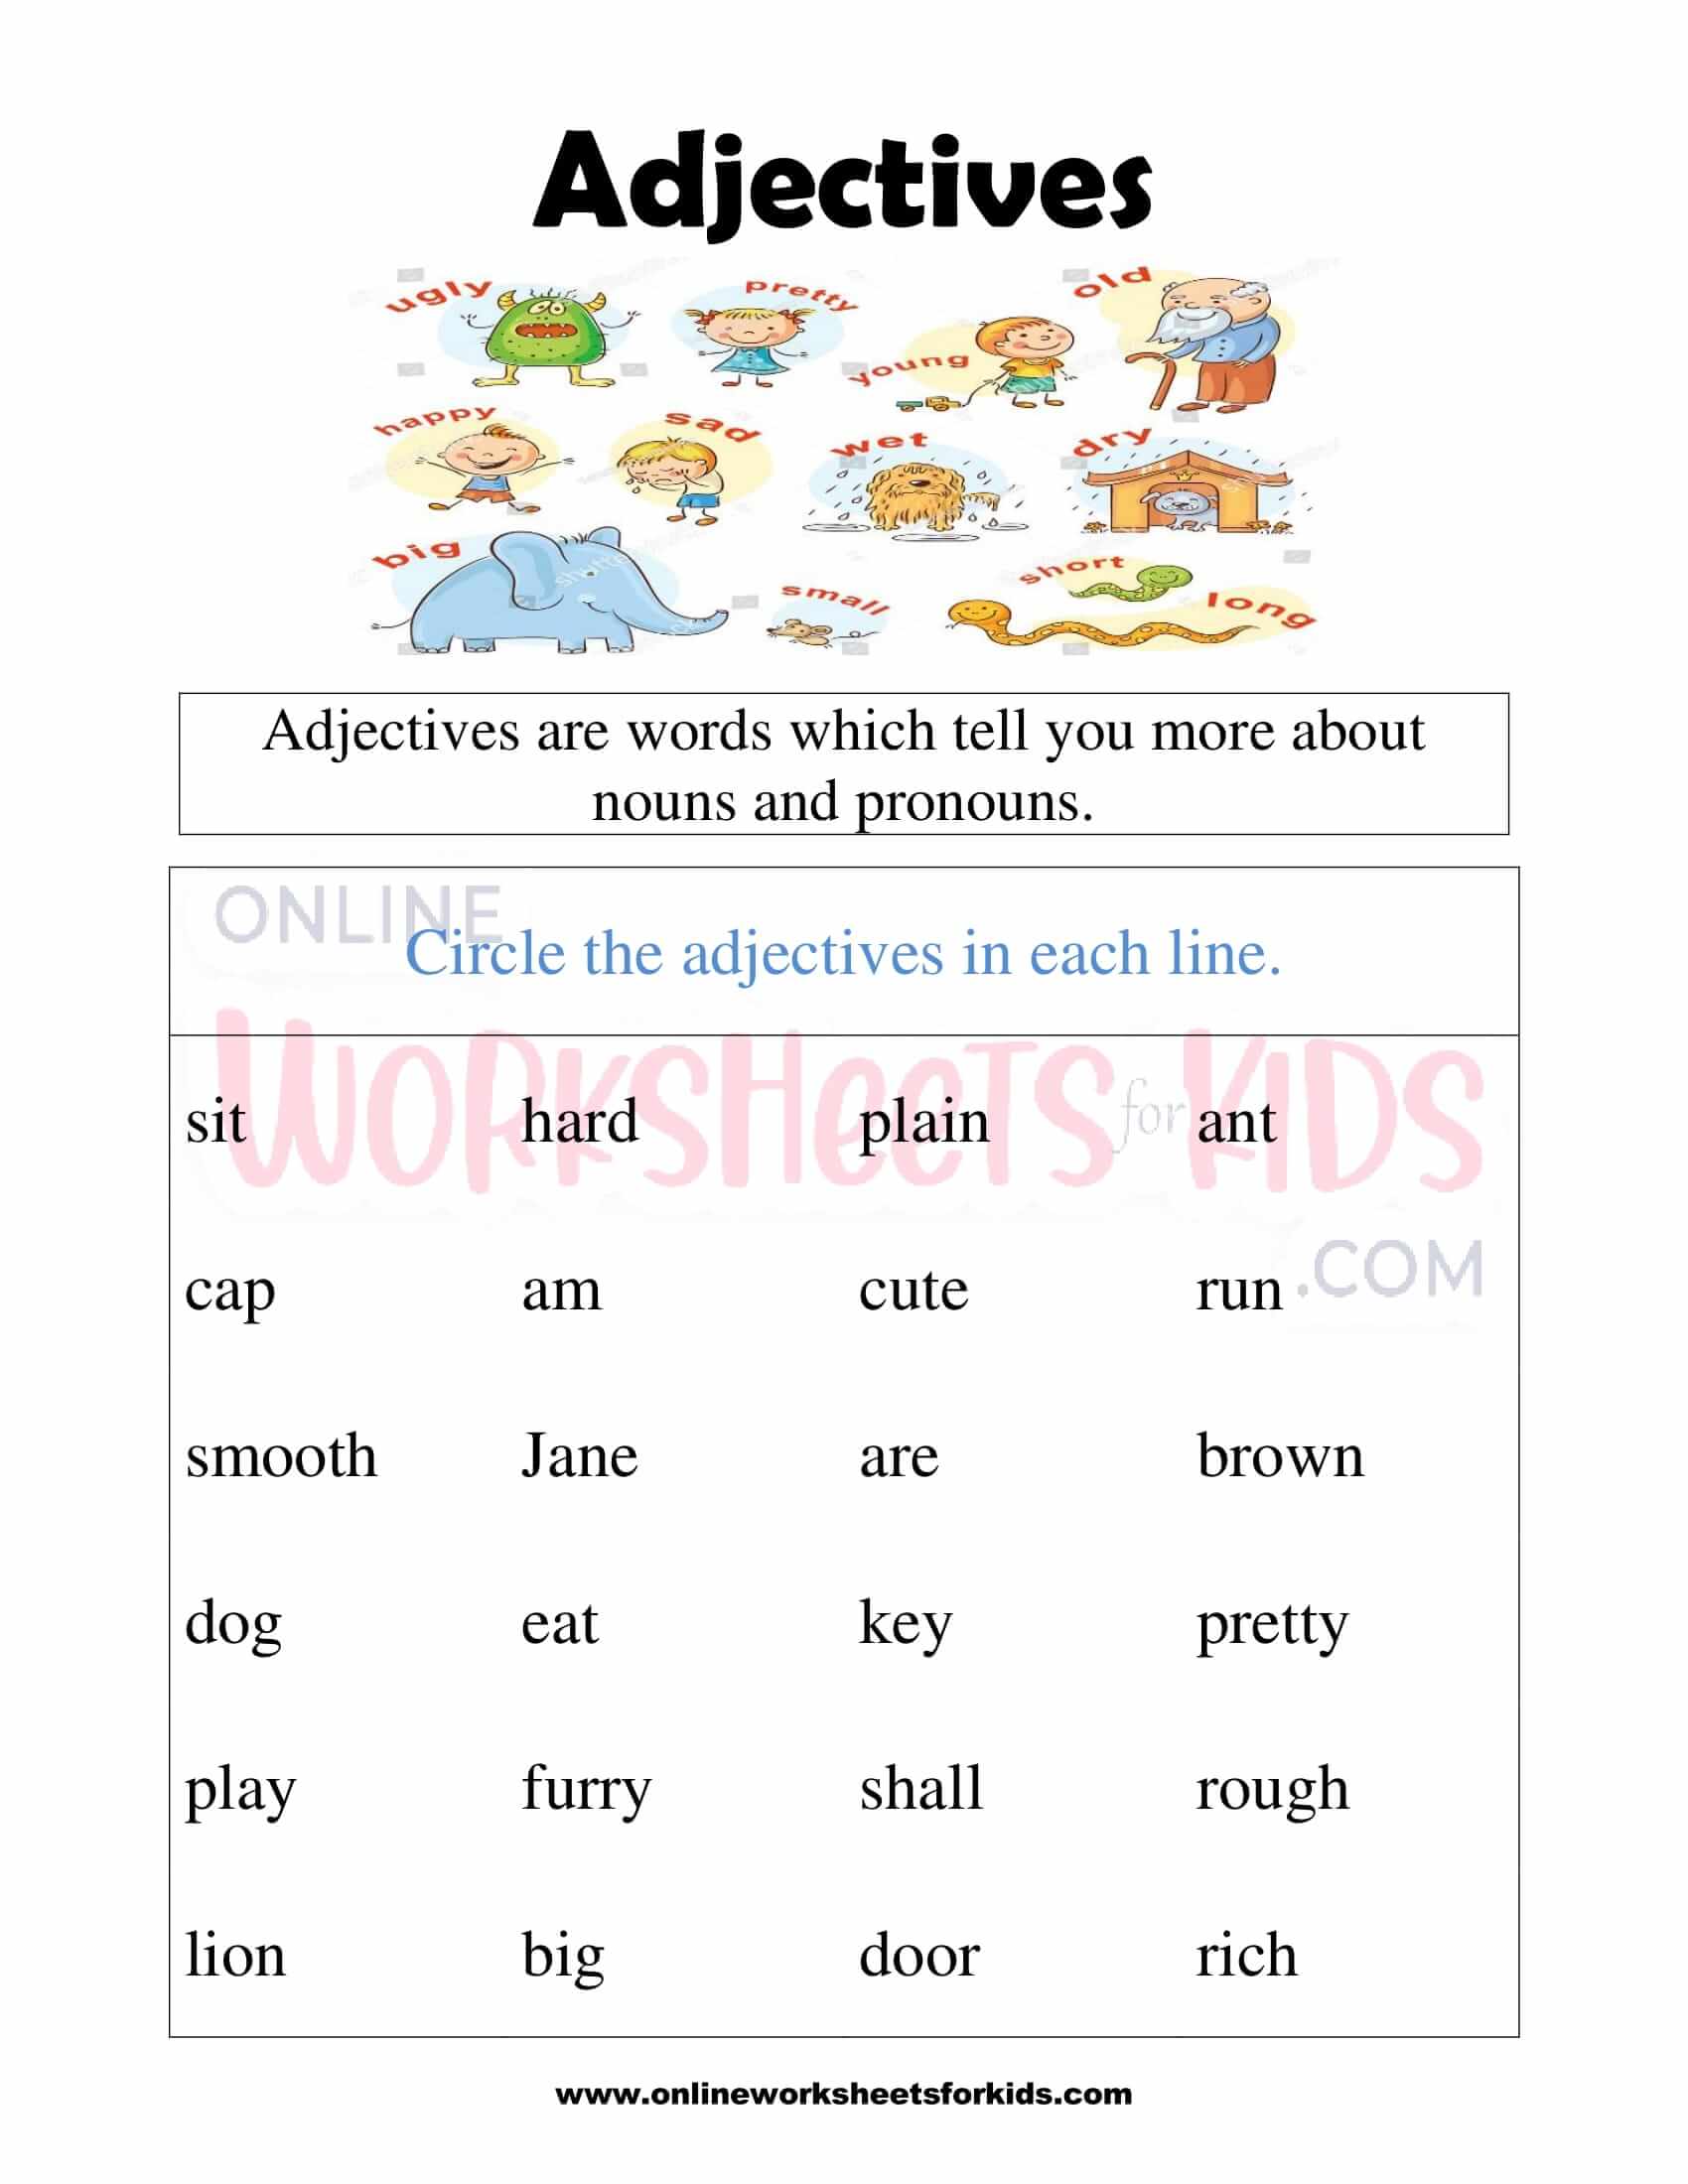 adjectives-worksheet-ks3-printable-worksheets-and-activities-for-teachers-parents-tutors-and